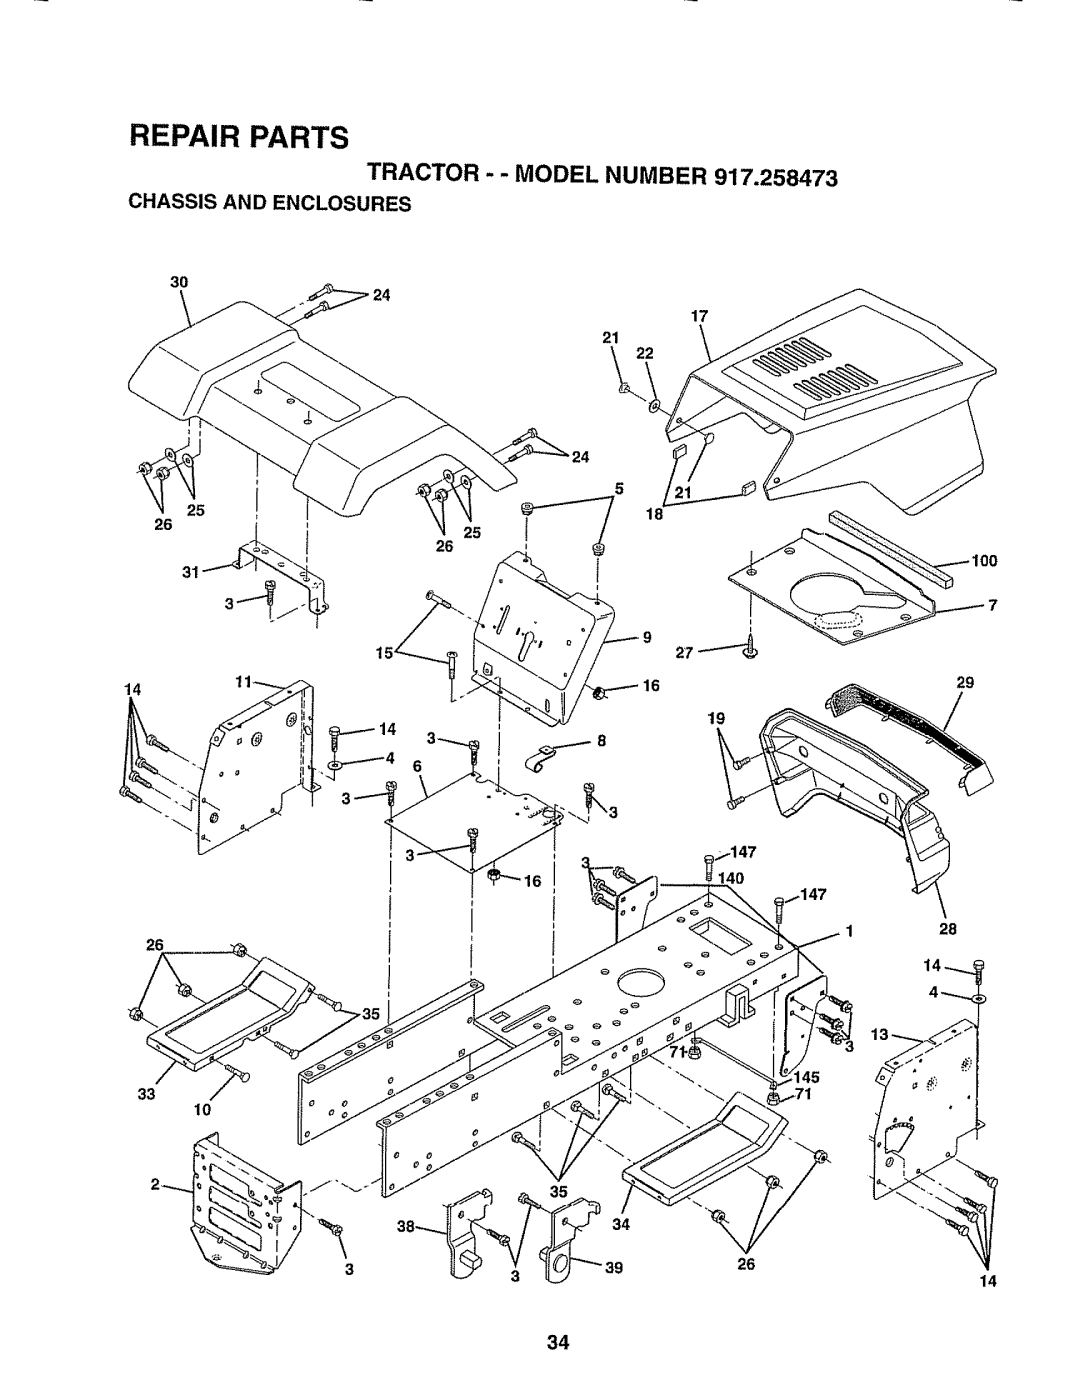 Sears 917.258473 owner manual Tractor - - Model Number, Chassis And Enclosures, Repair Parts 